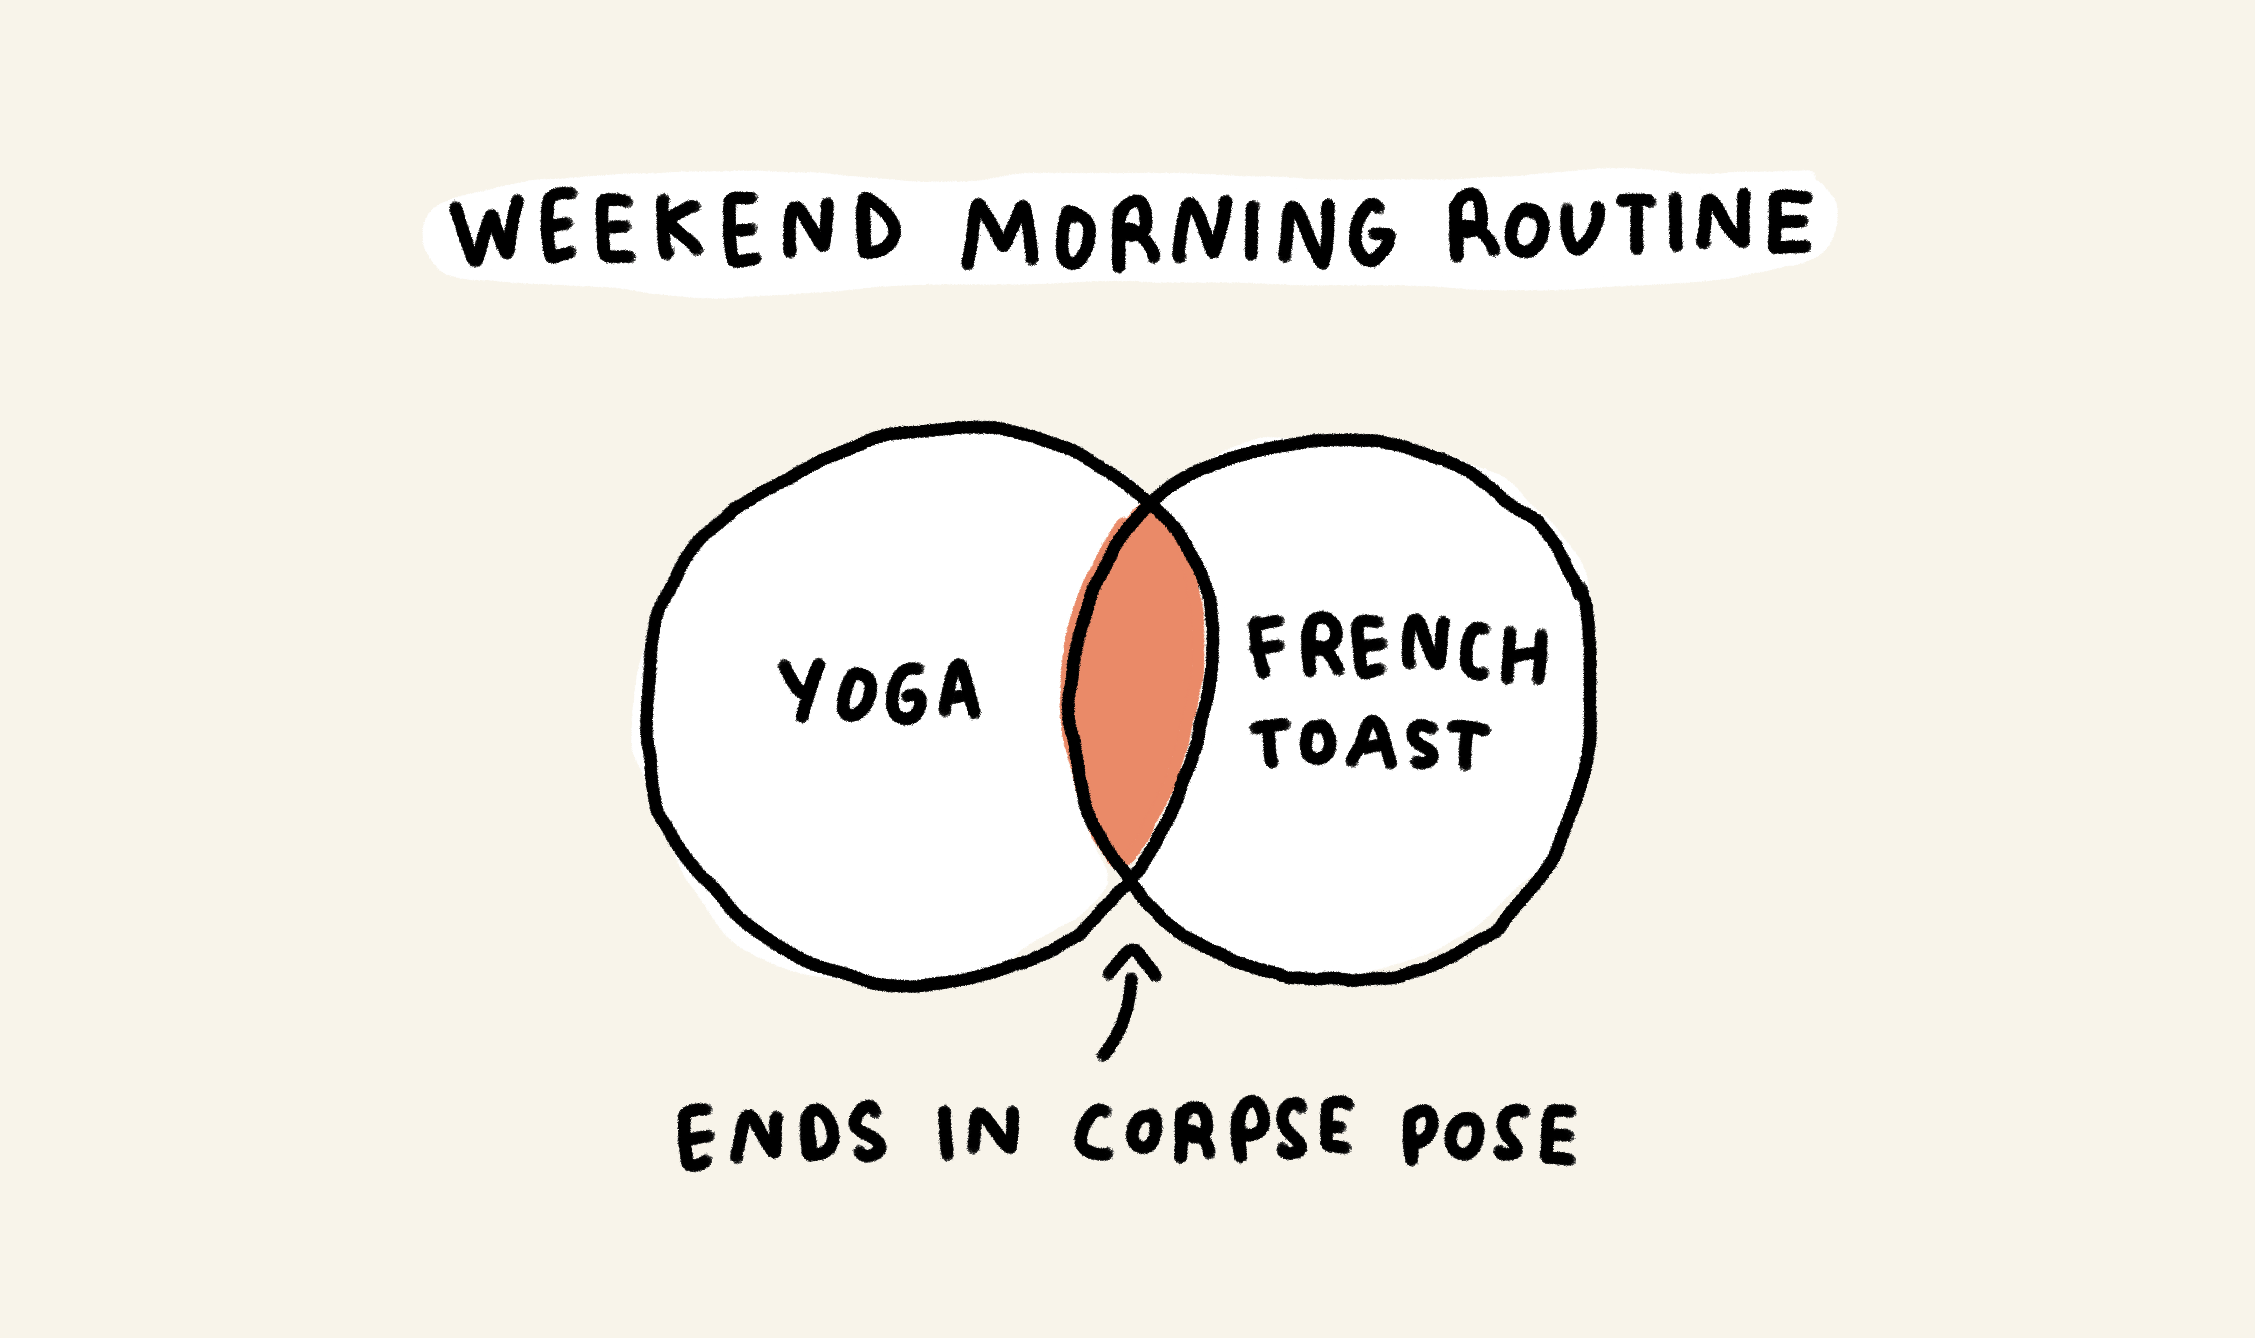 Weekend morning routine

Yoga + French toast= ends in corpse pose